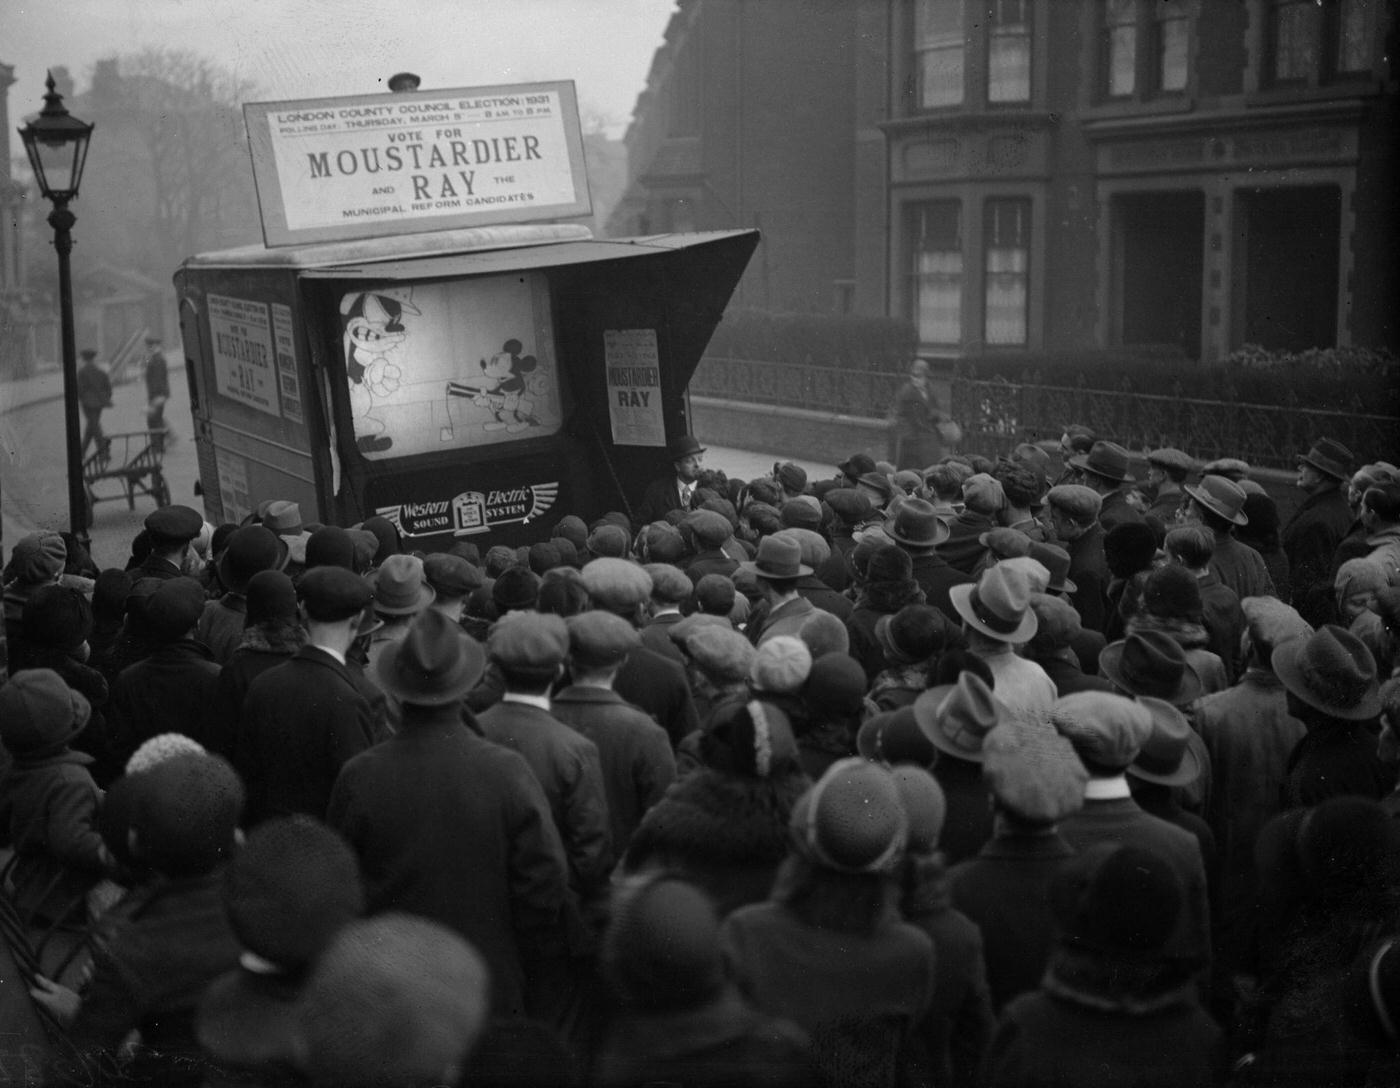 During an LCC (London County Council) election campaign run by Sir W Ray, Mickey Mouse is showing on a small screen in a city street, 1931